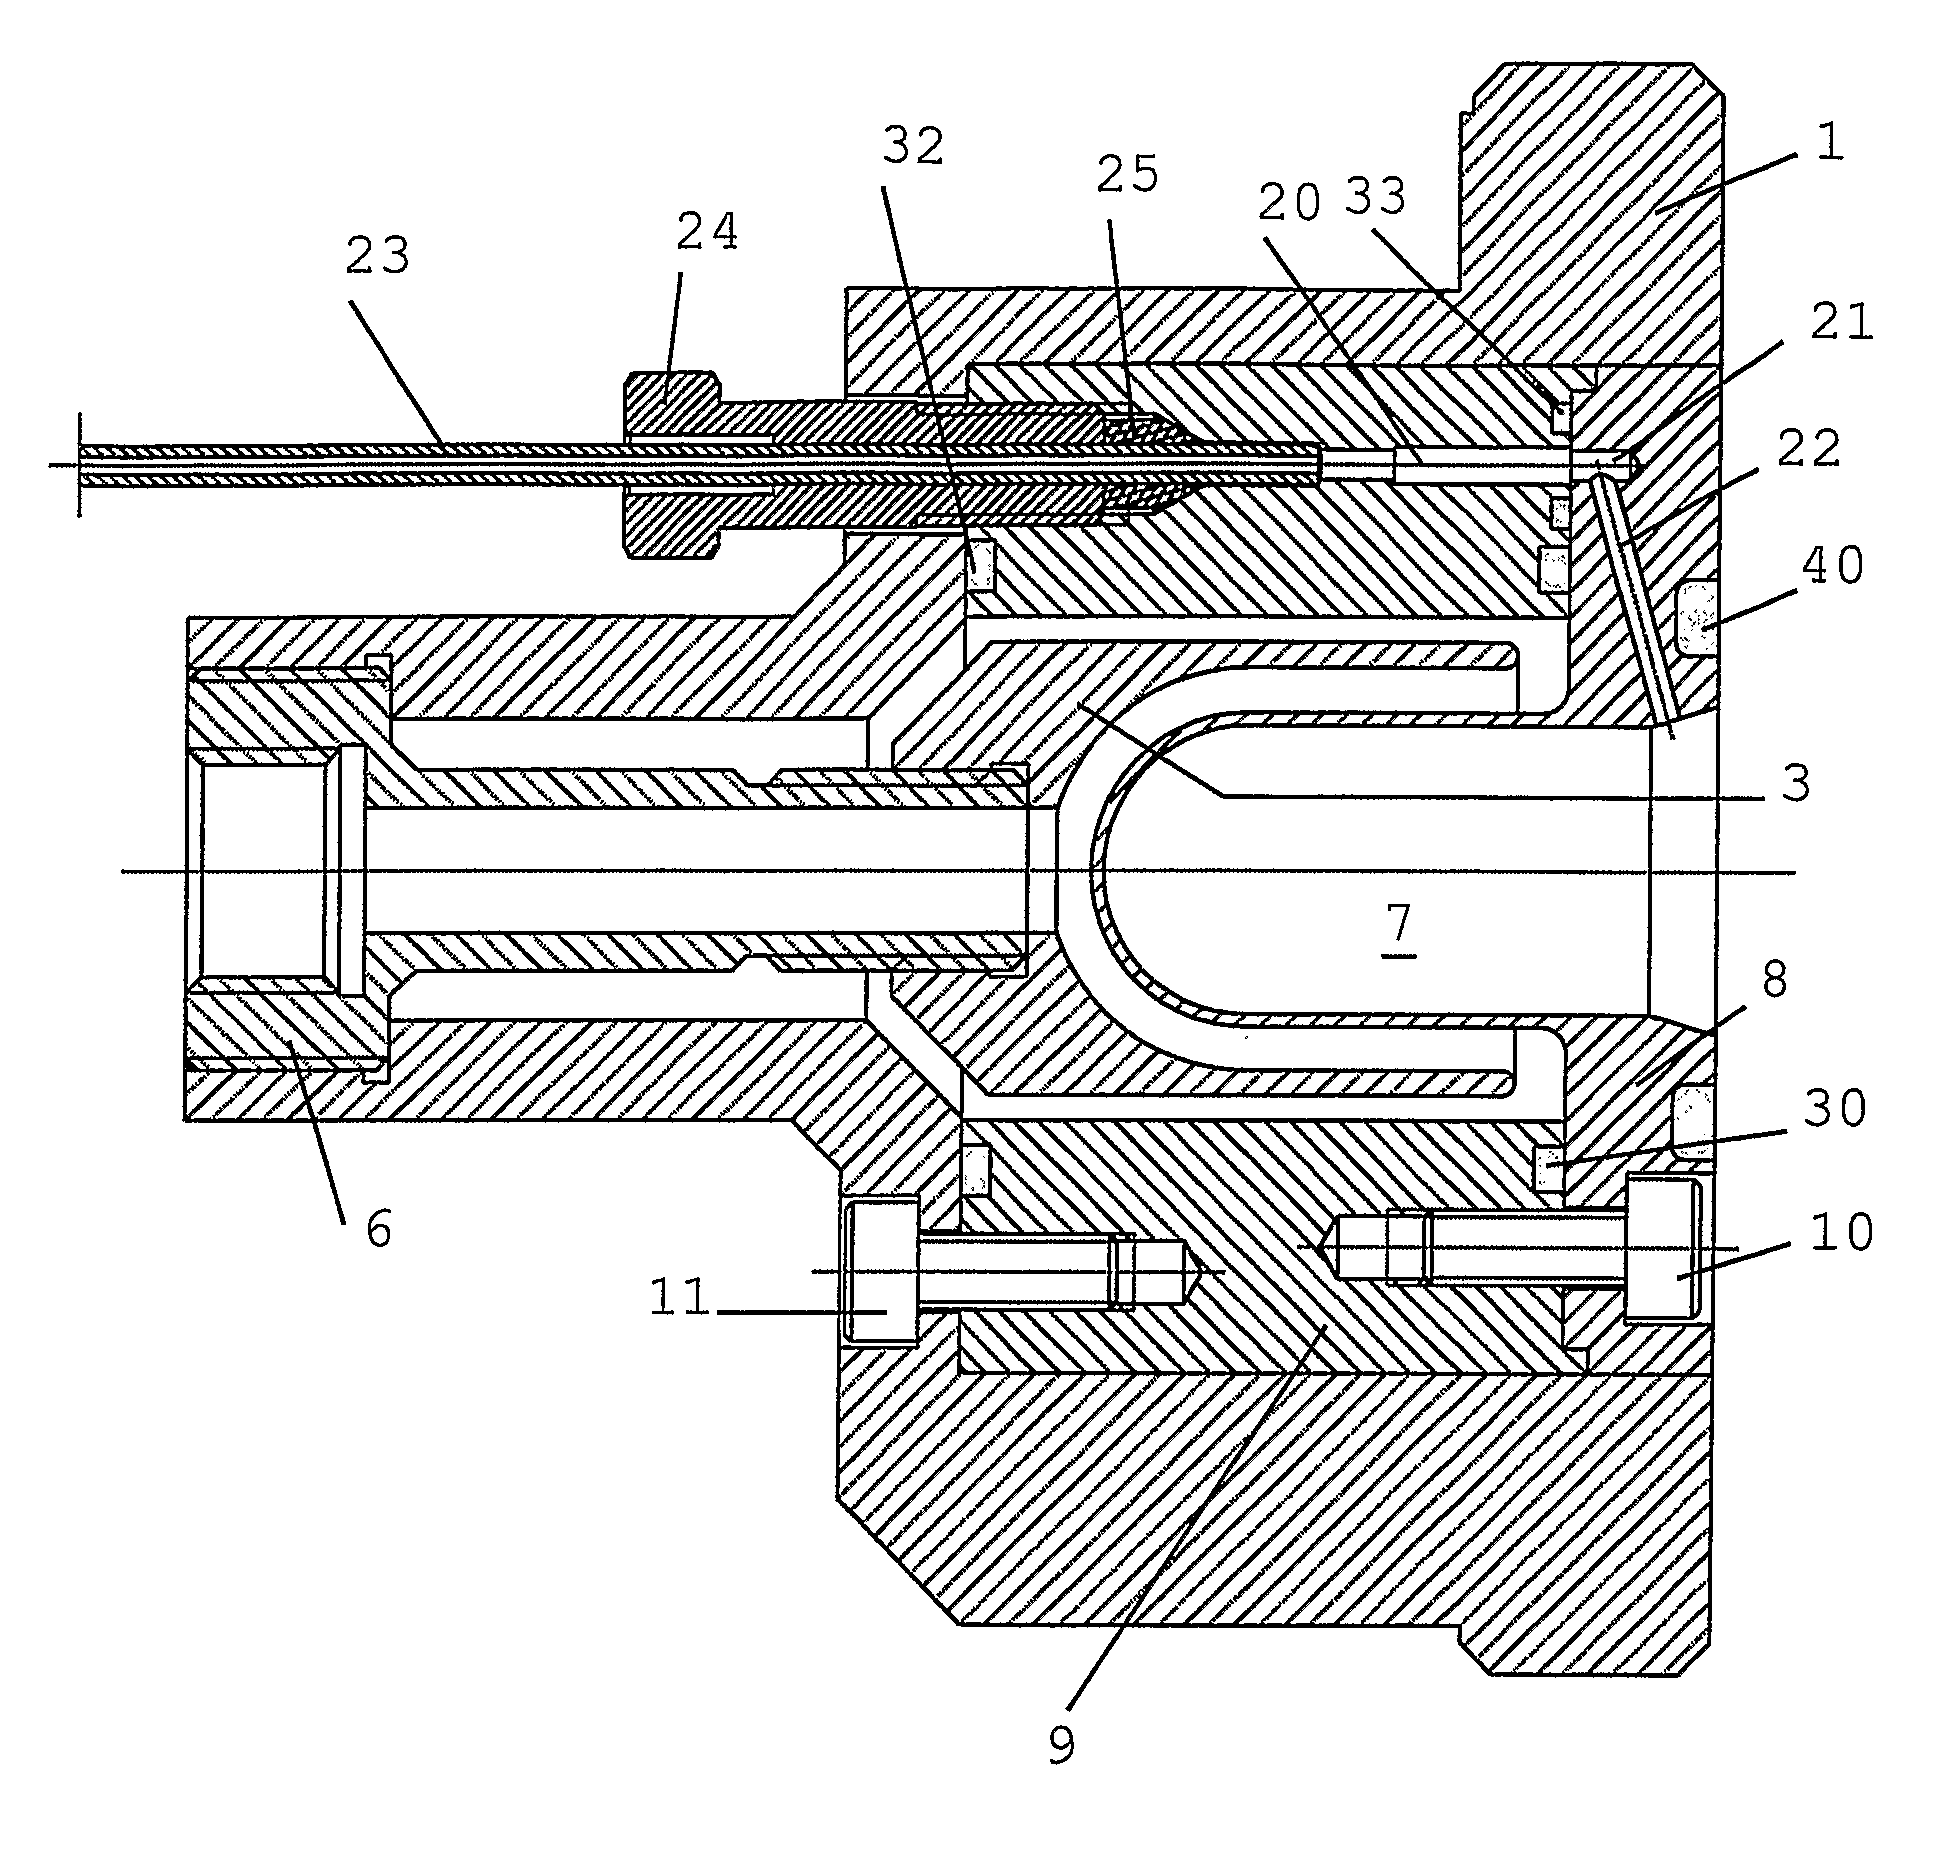 Target device for producing a radioisotope